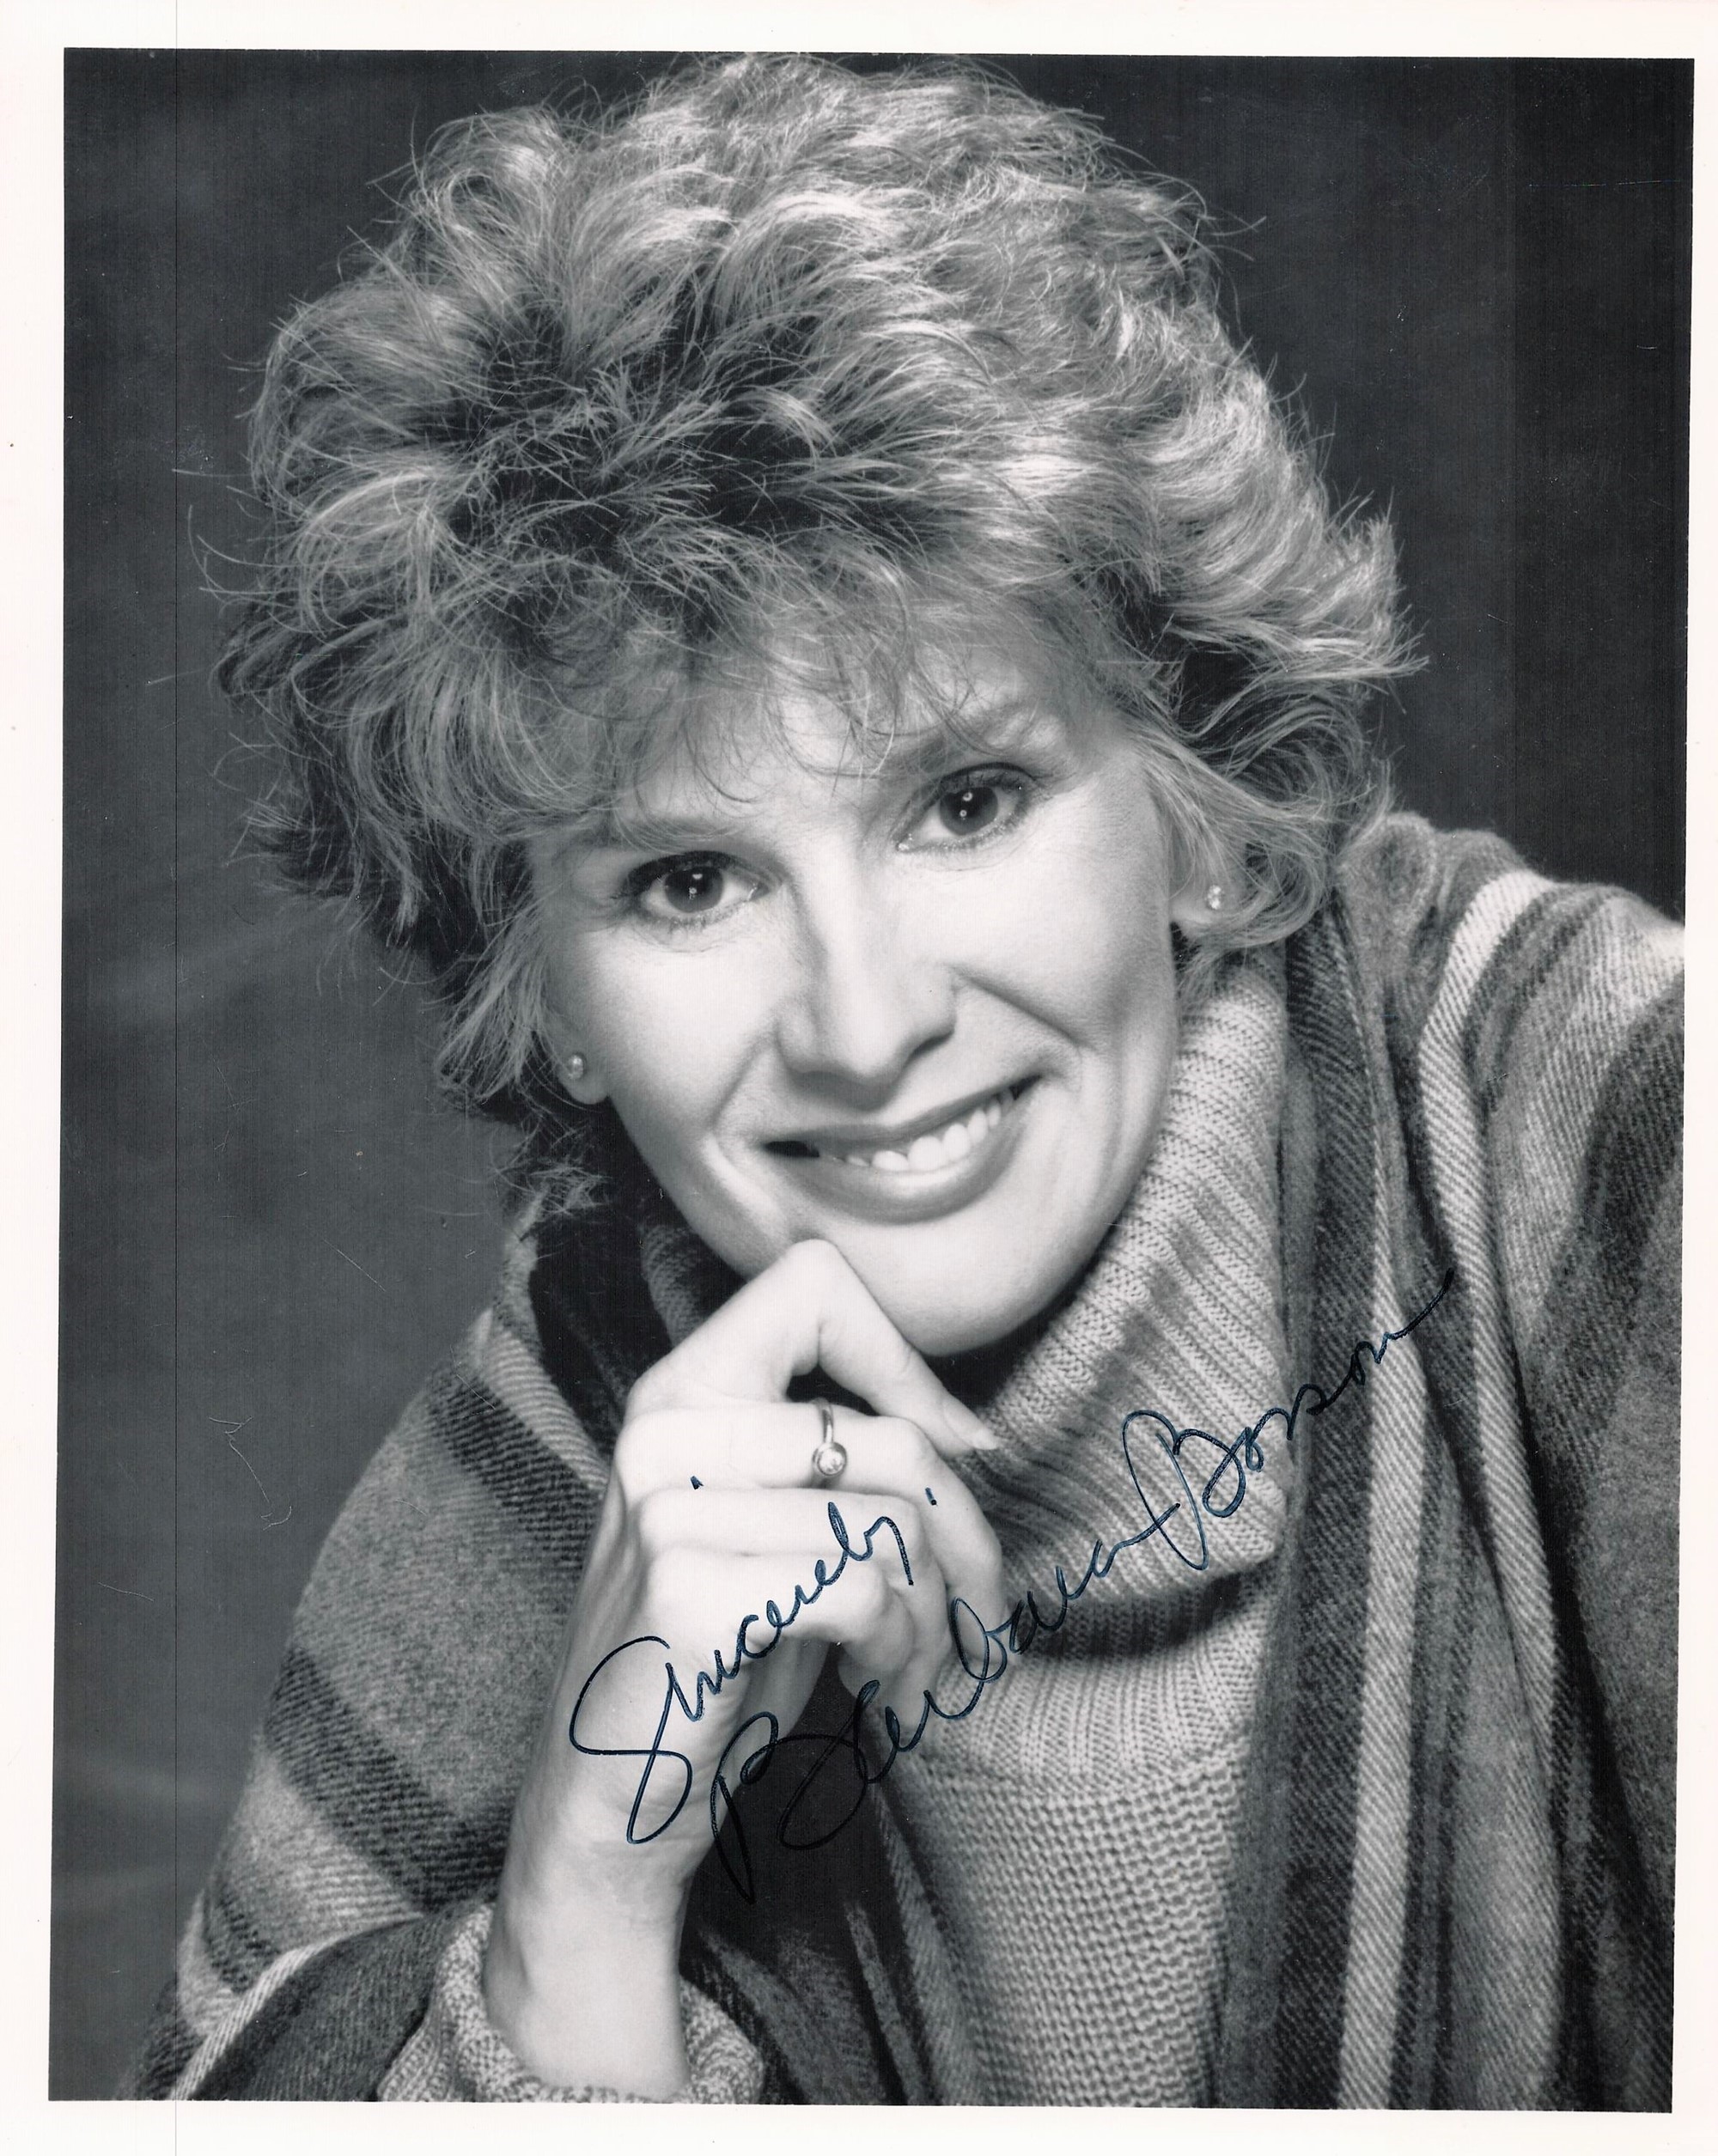 Barbara Bosson American Actress Signed10x8 B/W Photo. Good condition. All autographs come with a